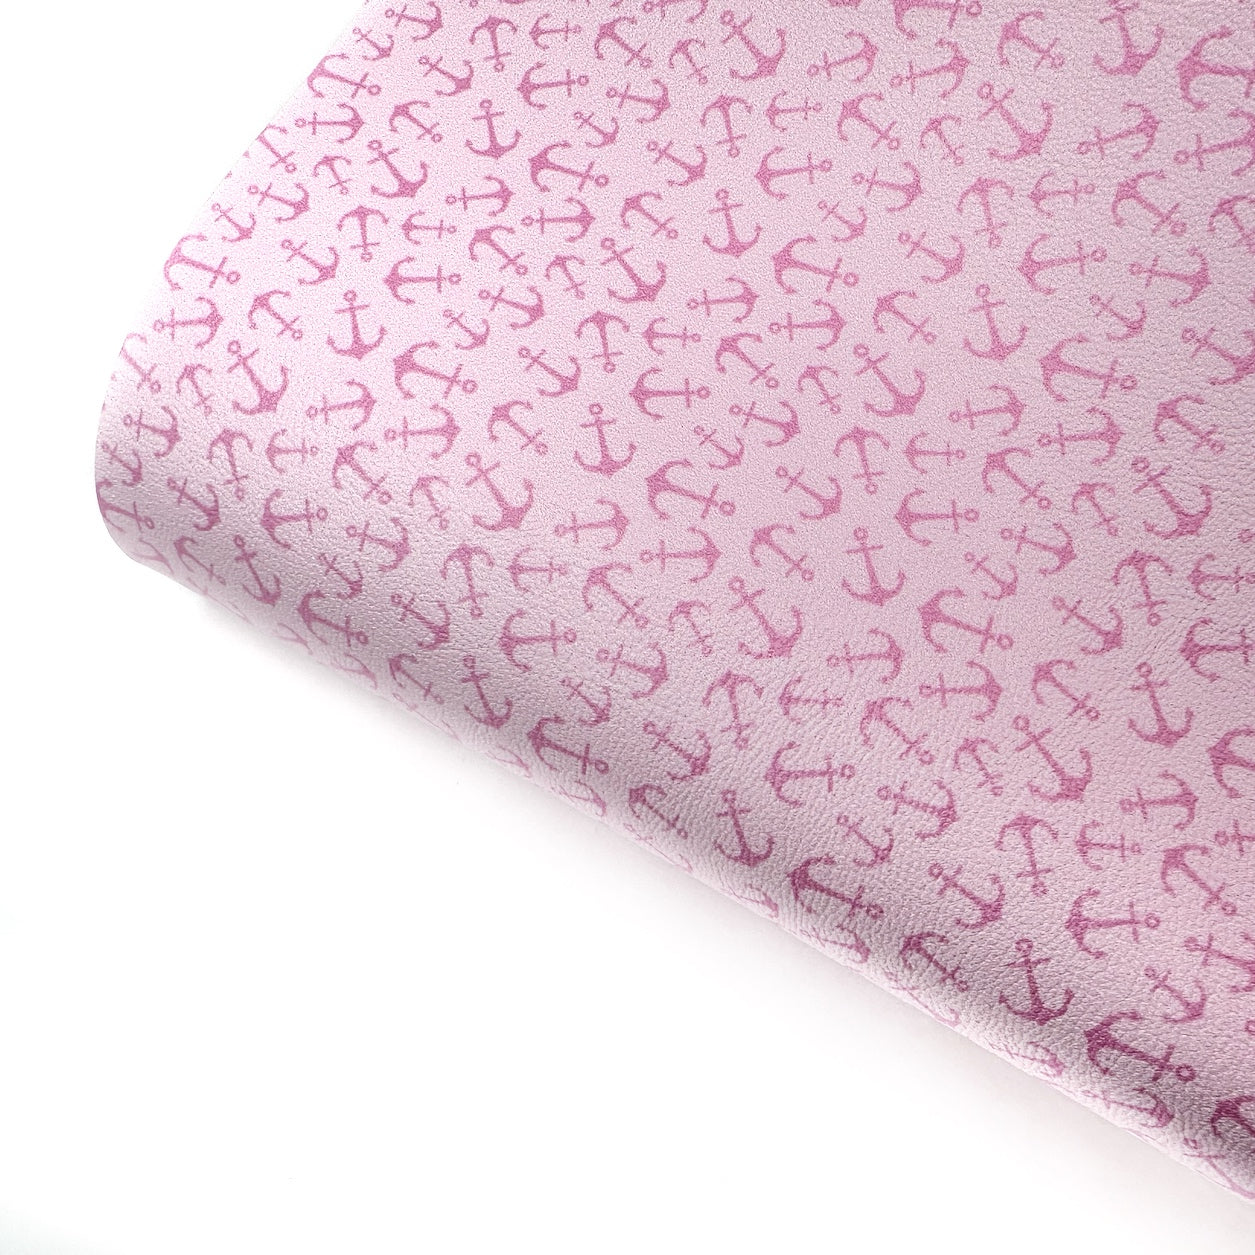 Pink Anchors Away Premium Faux Leather Fabric Sheets